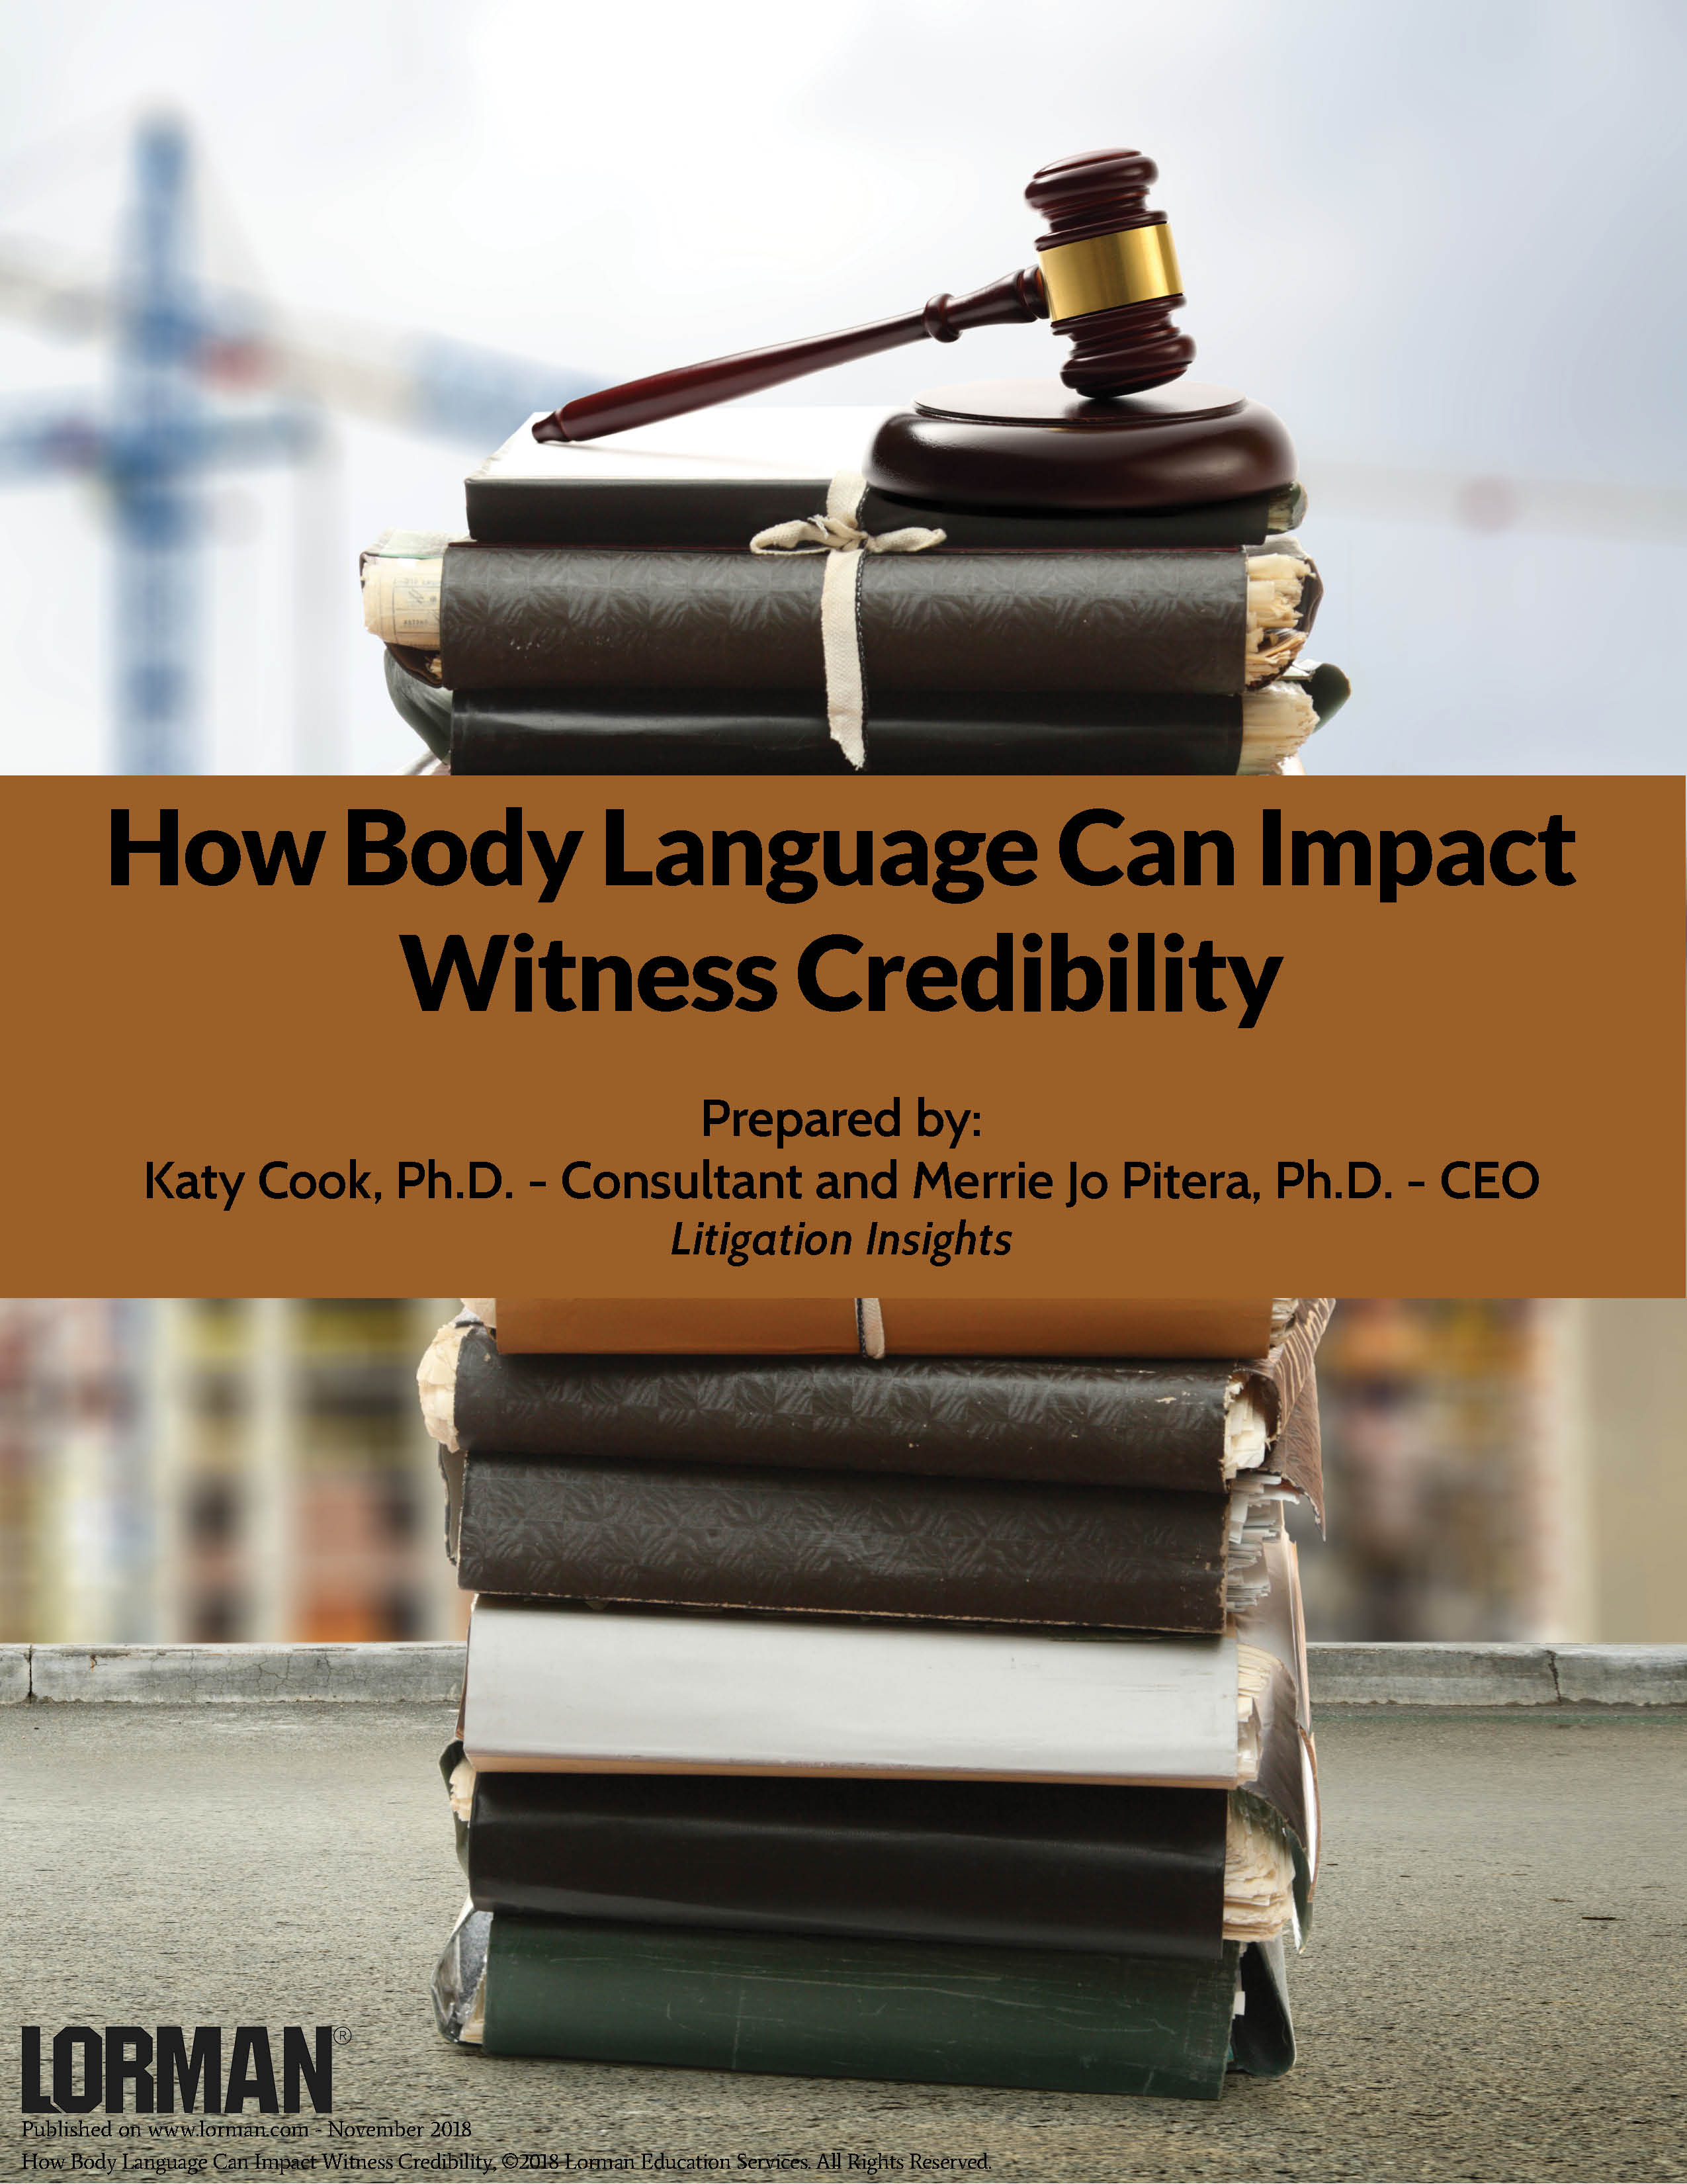 How Body Language Can Impact Witness Credibility